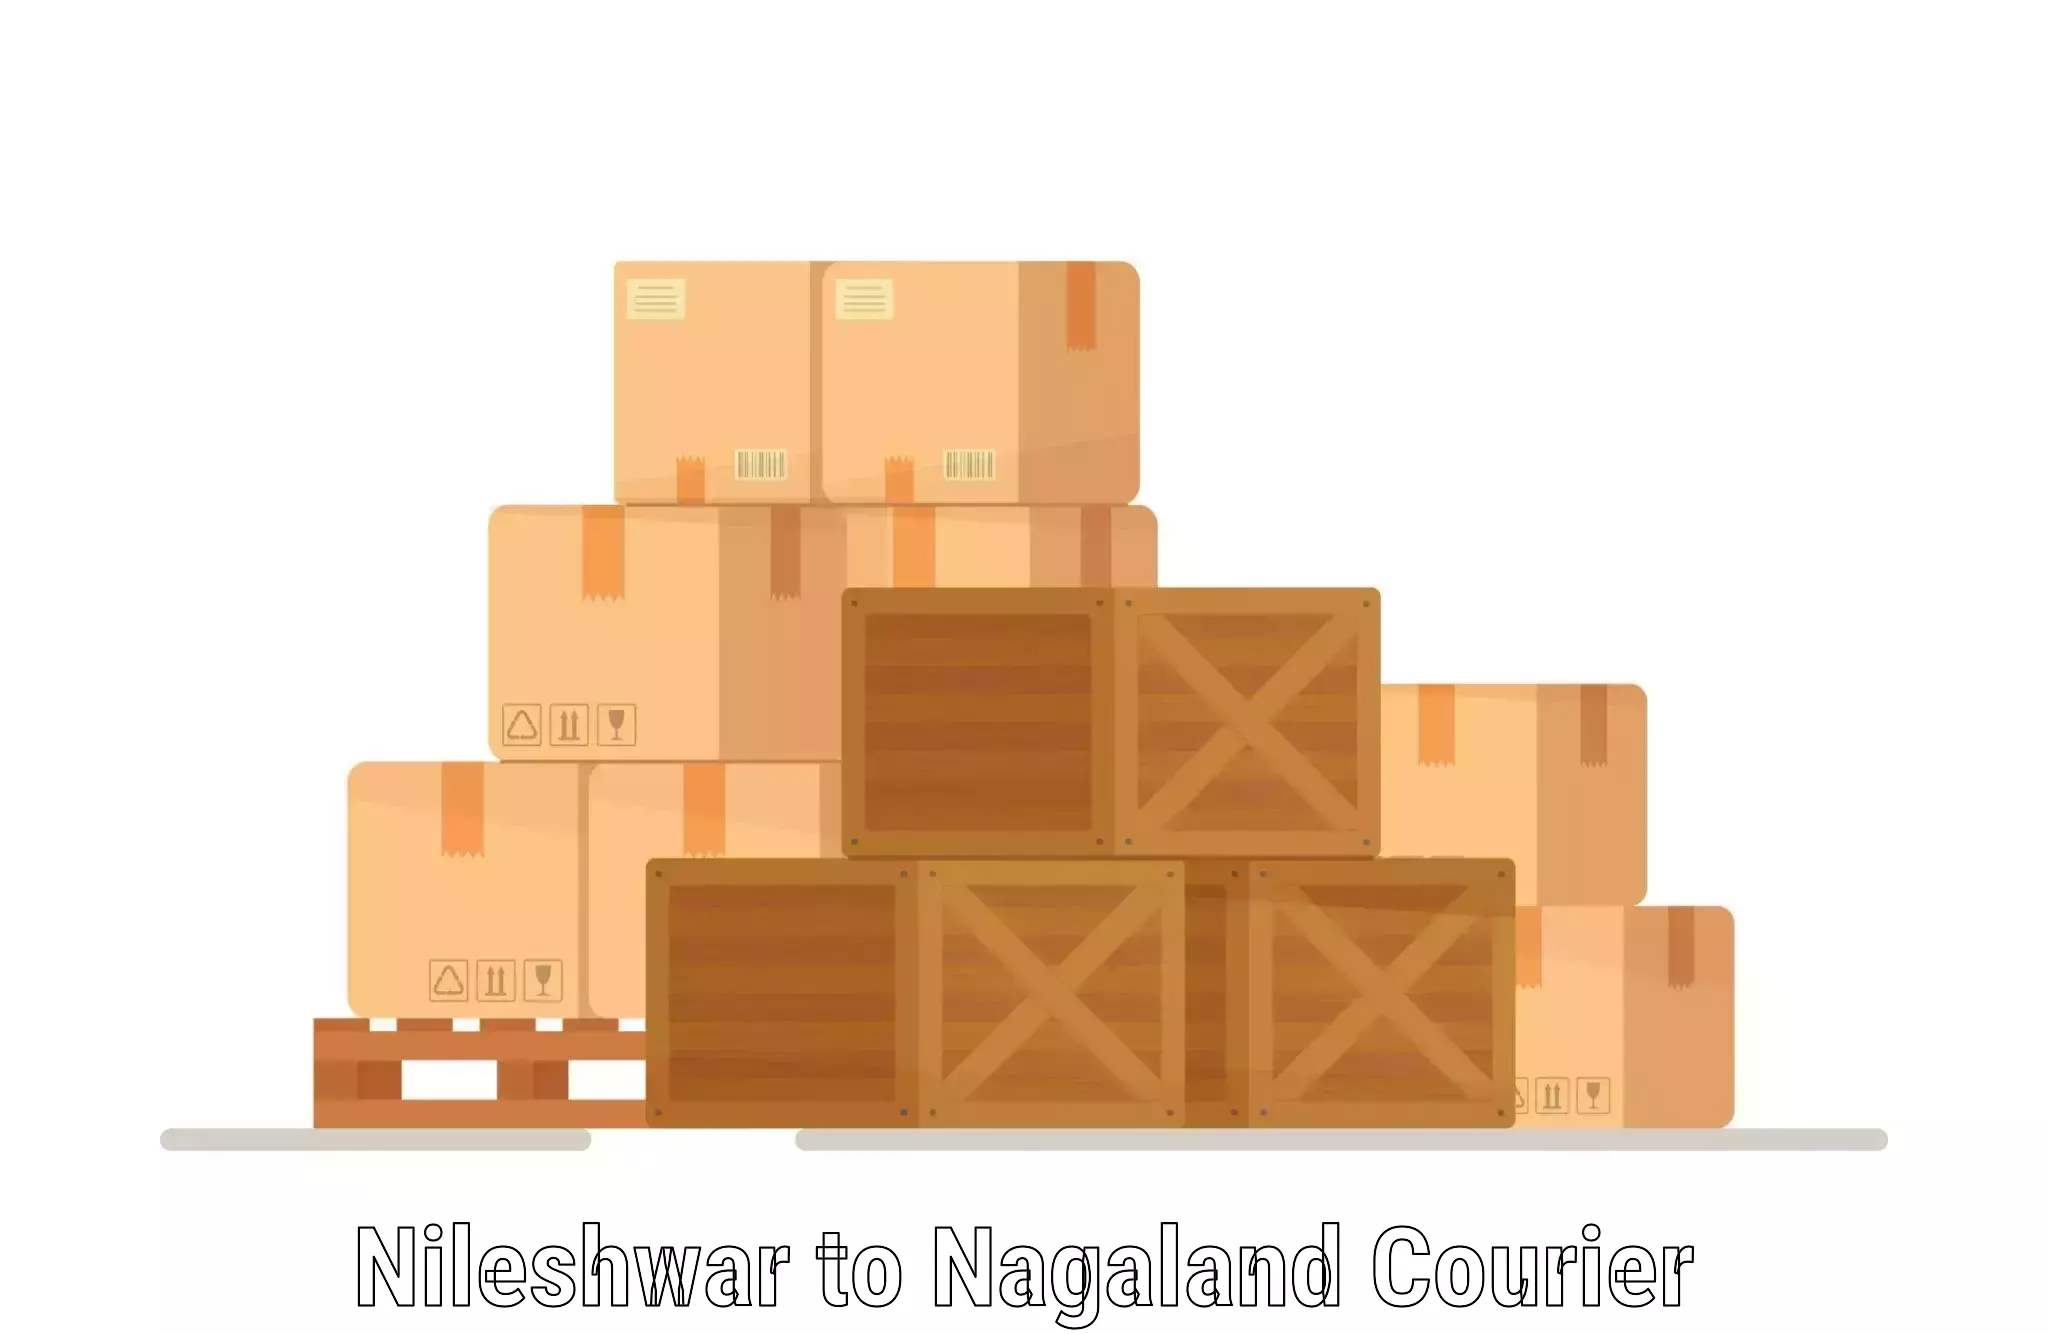 State-of-the-art courier technology Nileshwar to Mon